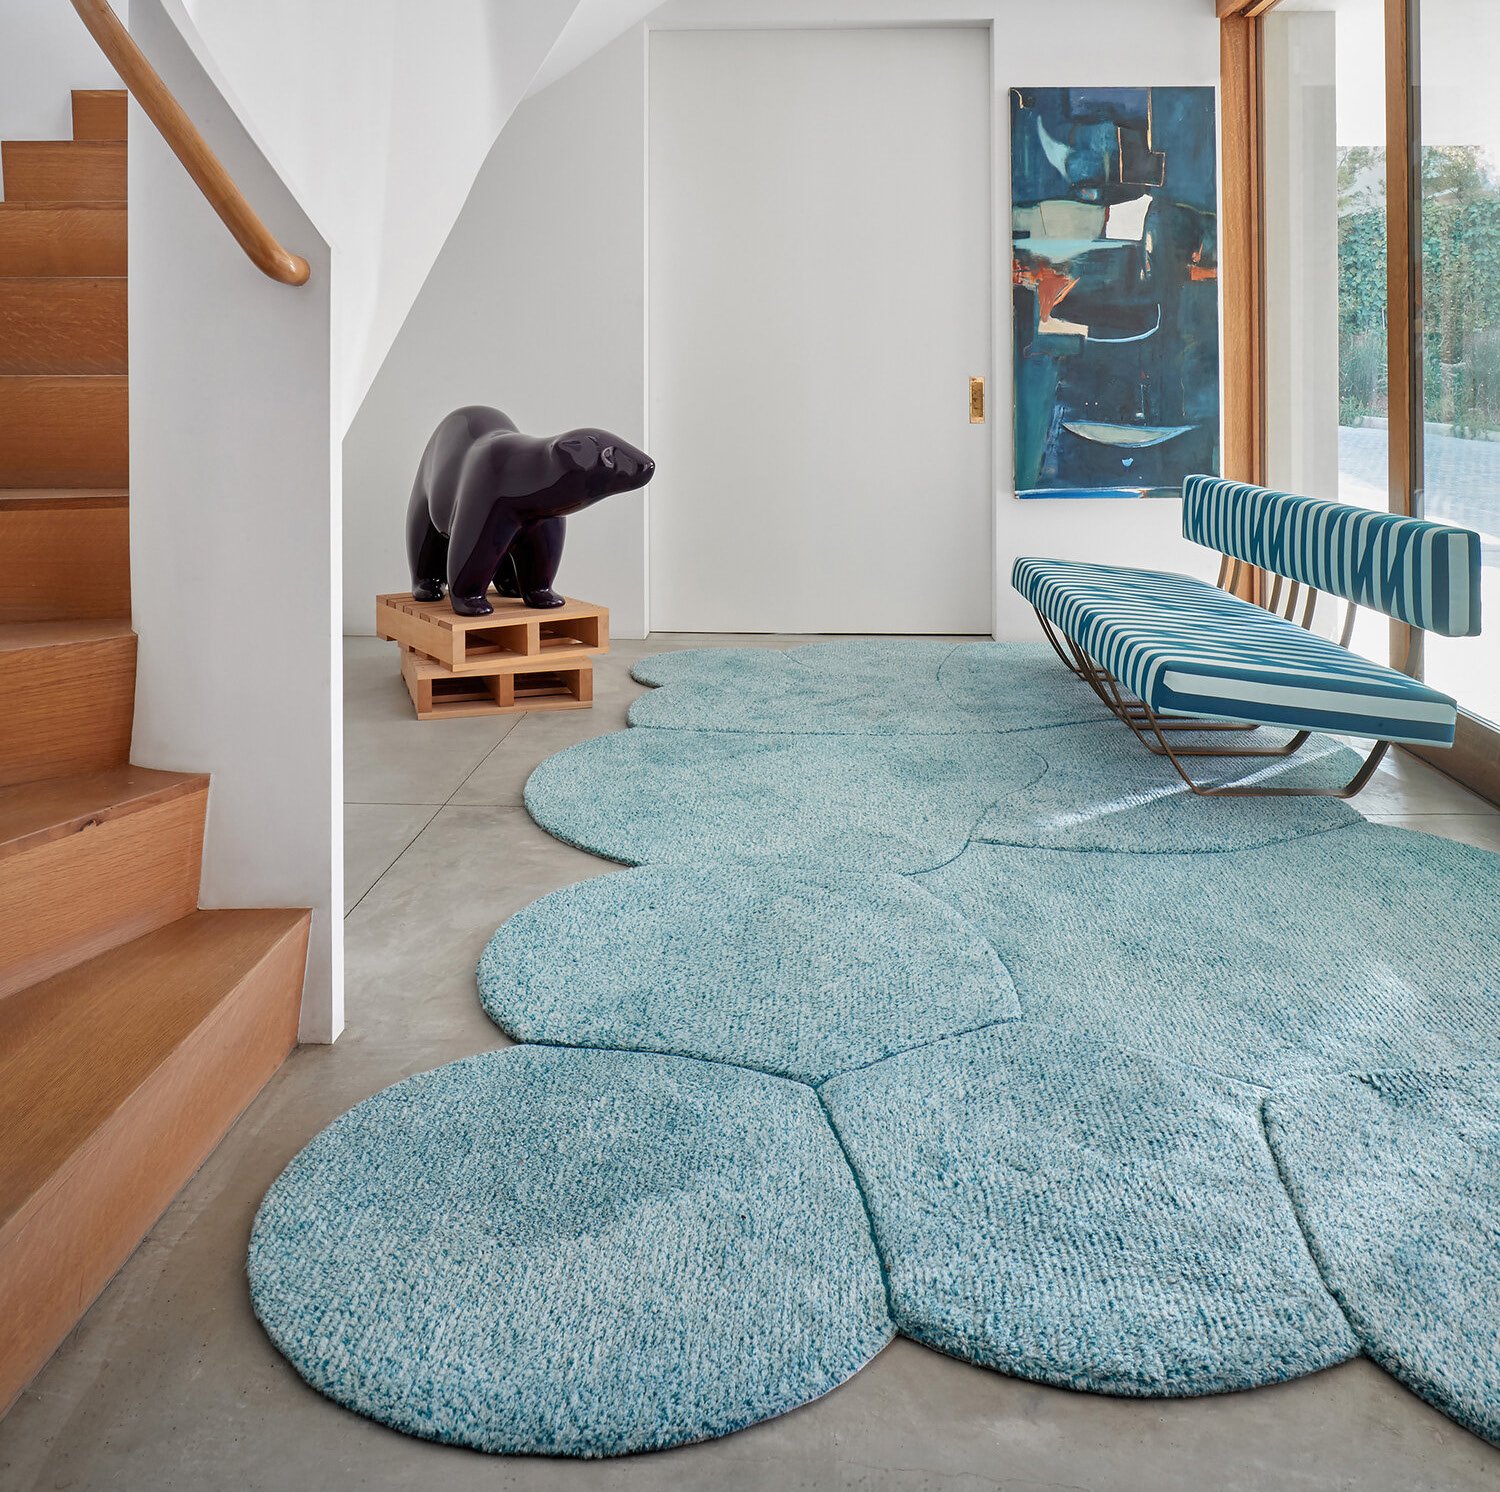 The Rug Company Projects With Round And